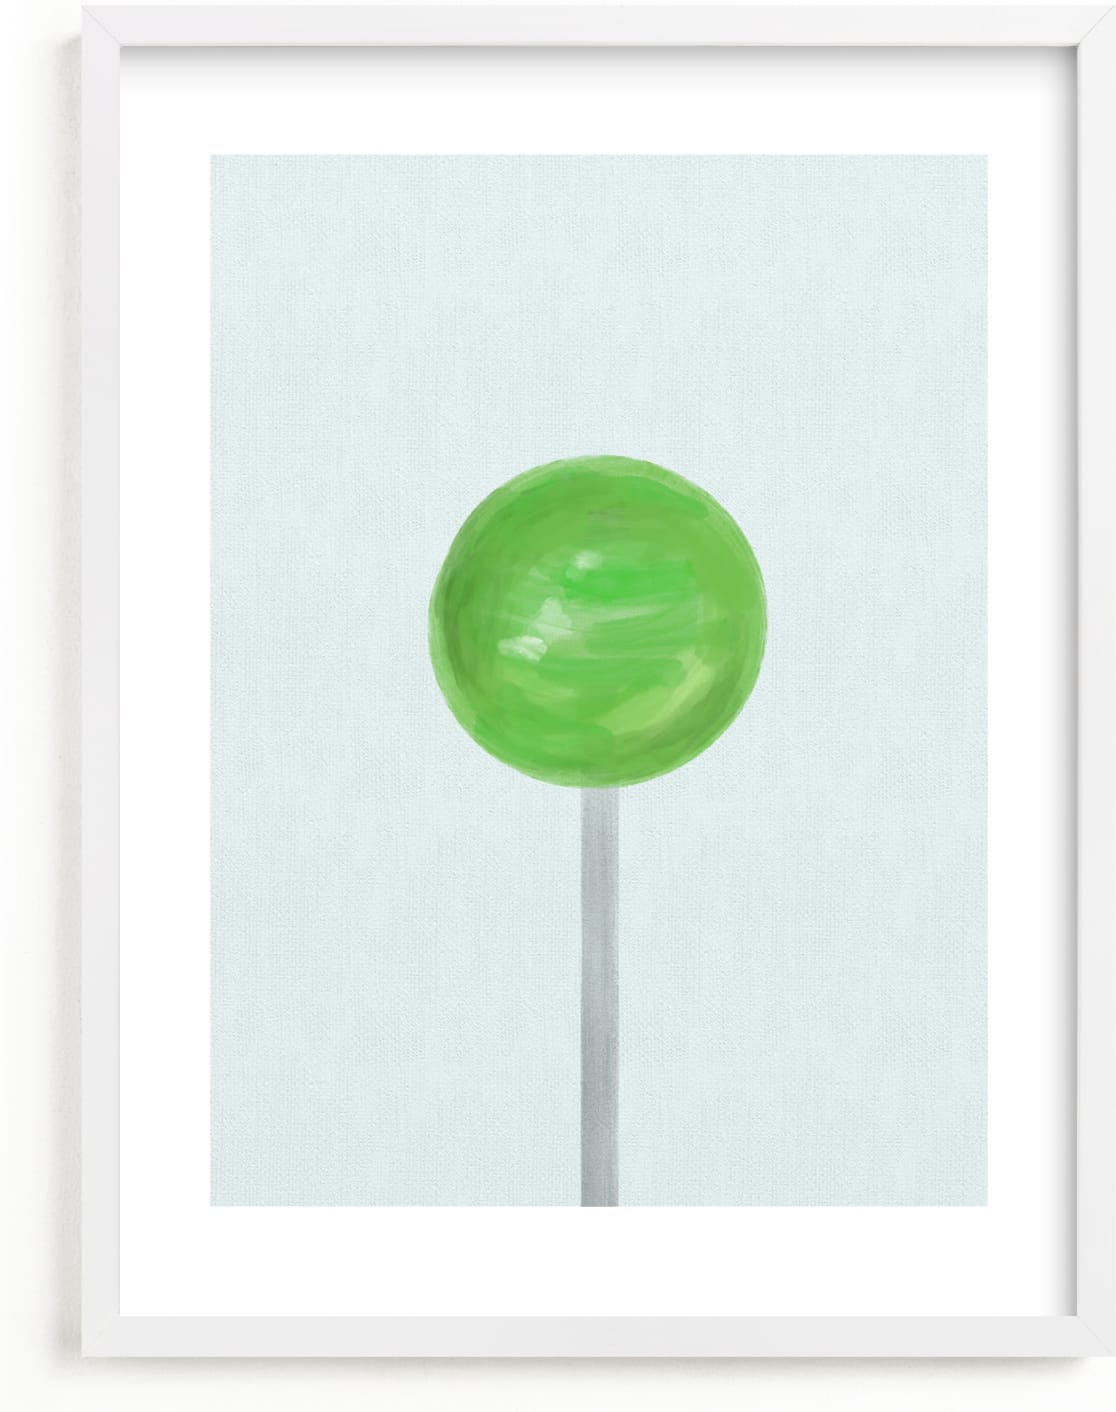 This is a green kids wall art by Maja Cunningham called Lolli Pop.